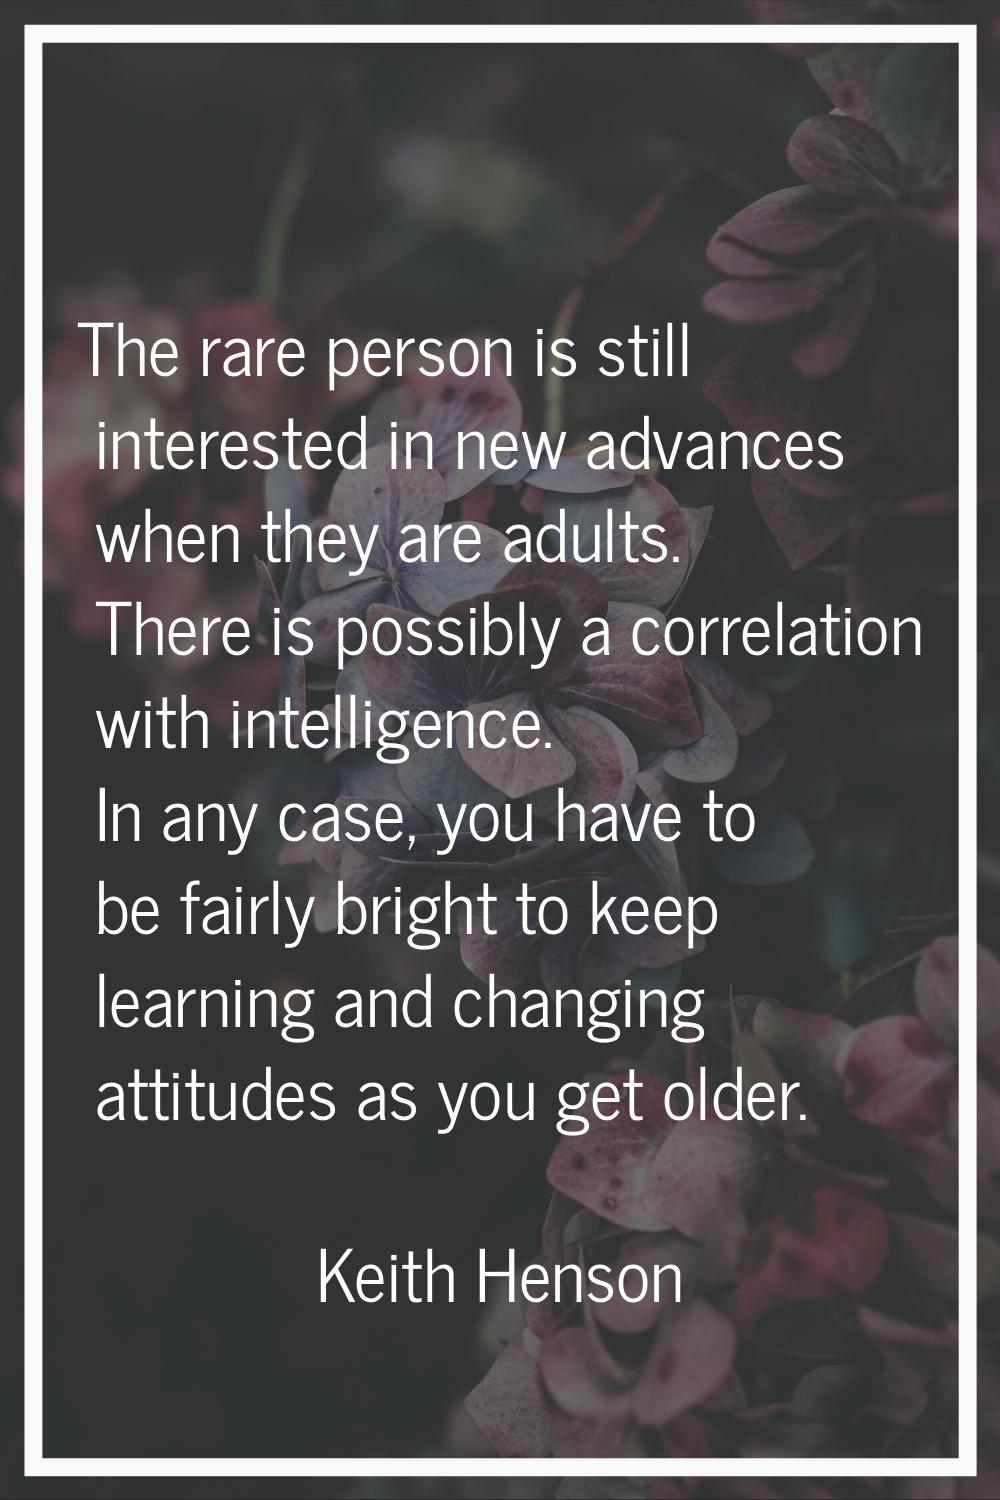 The rare person is still interested in new advances when they are adults. There is possibly a corre